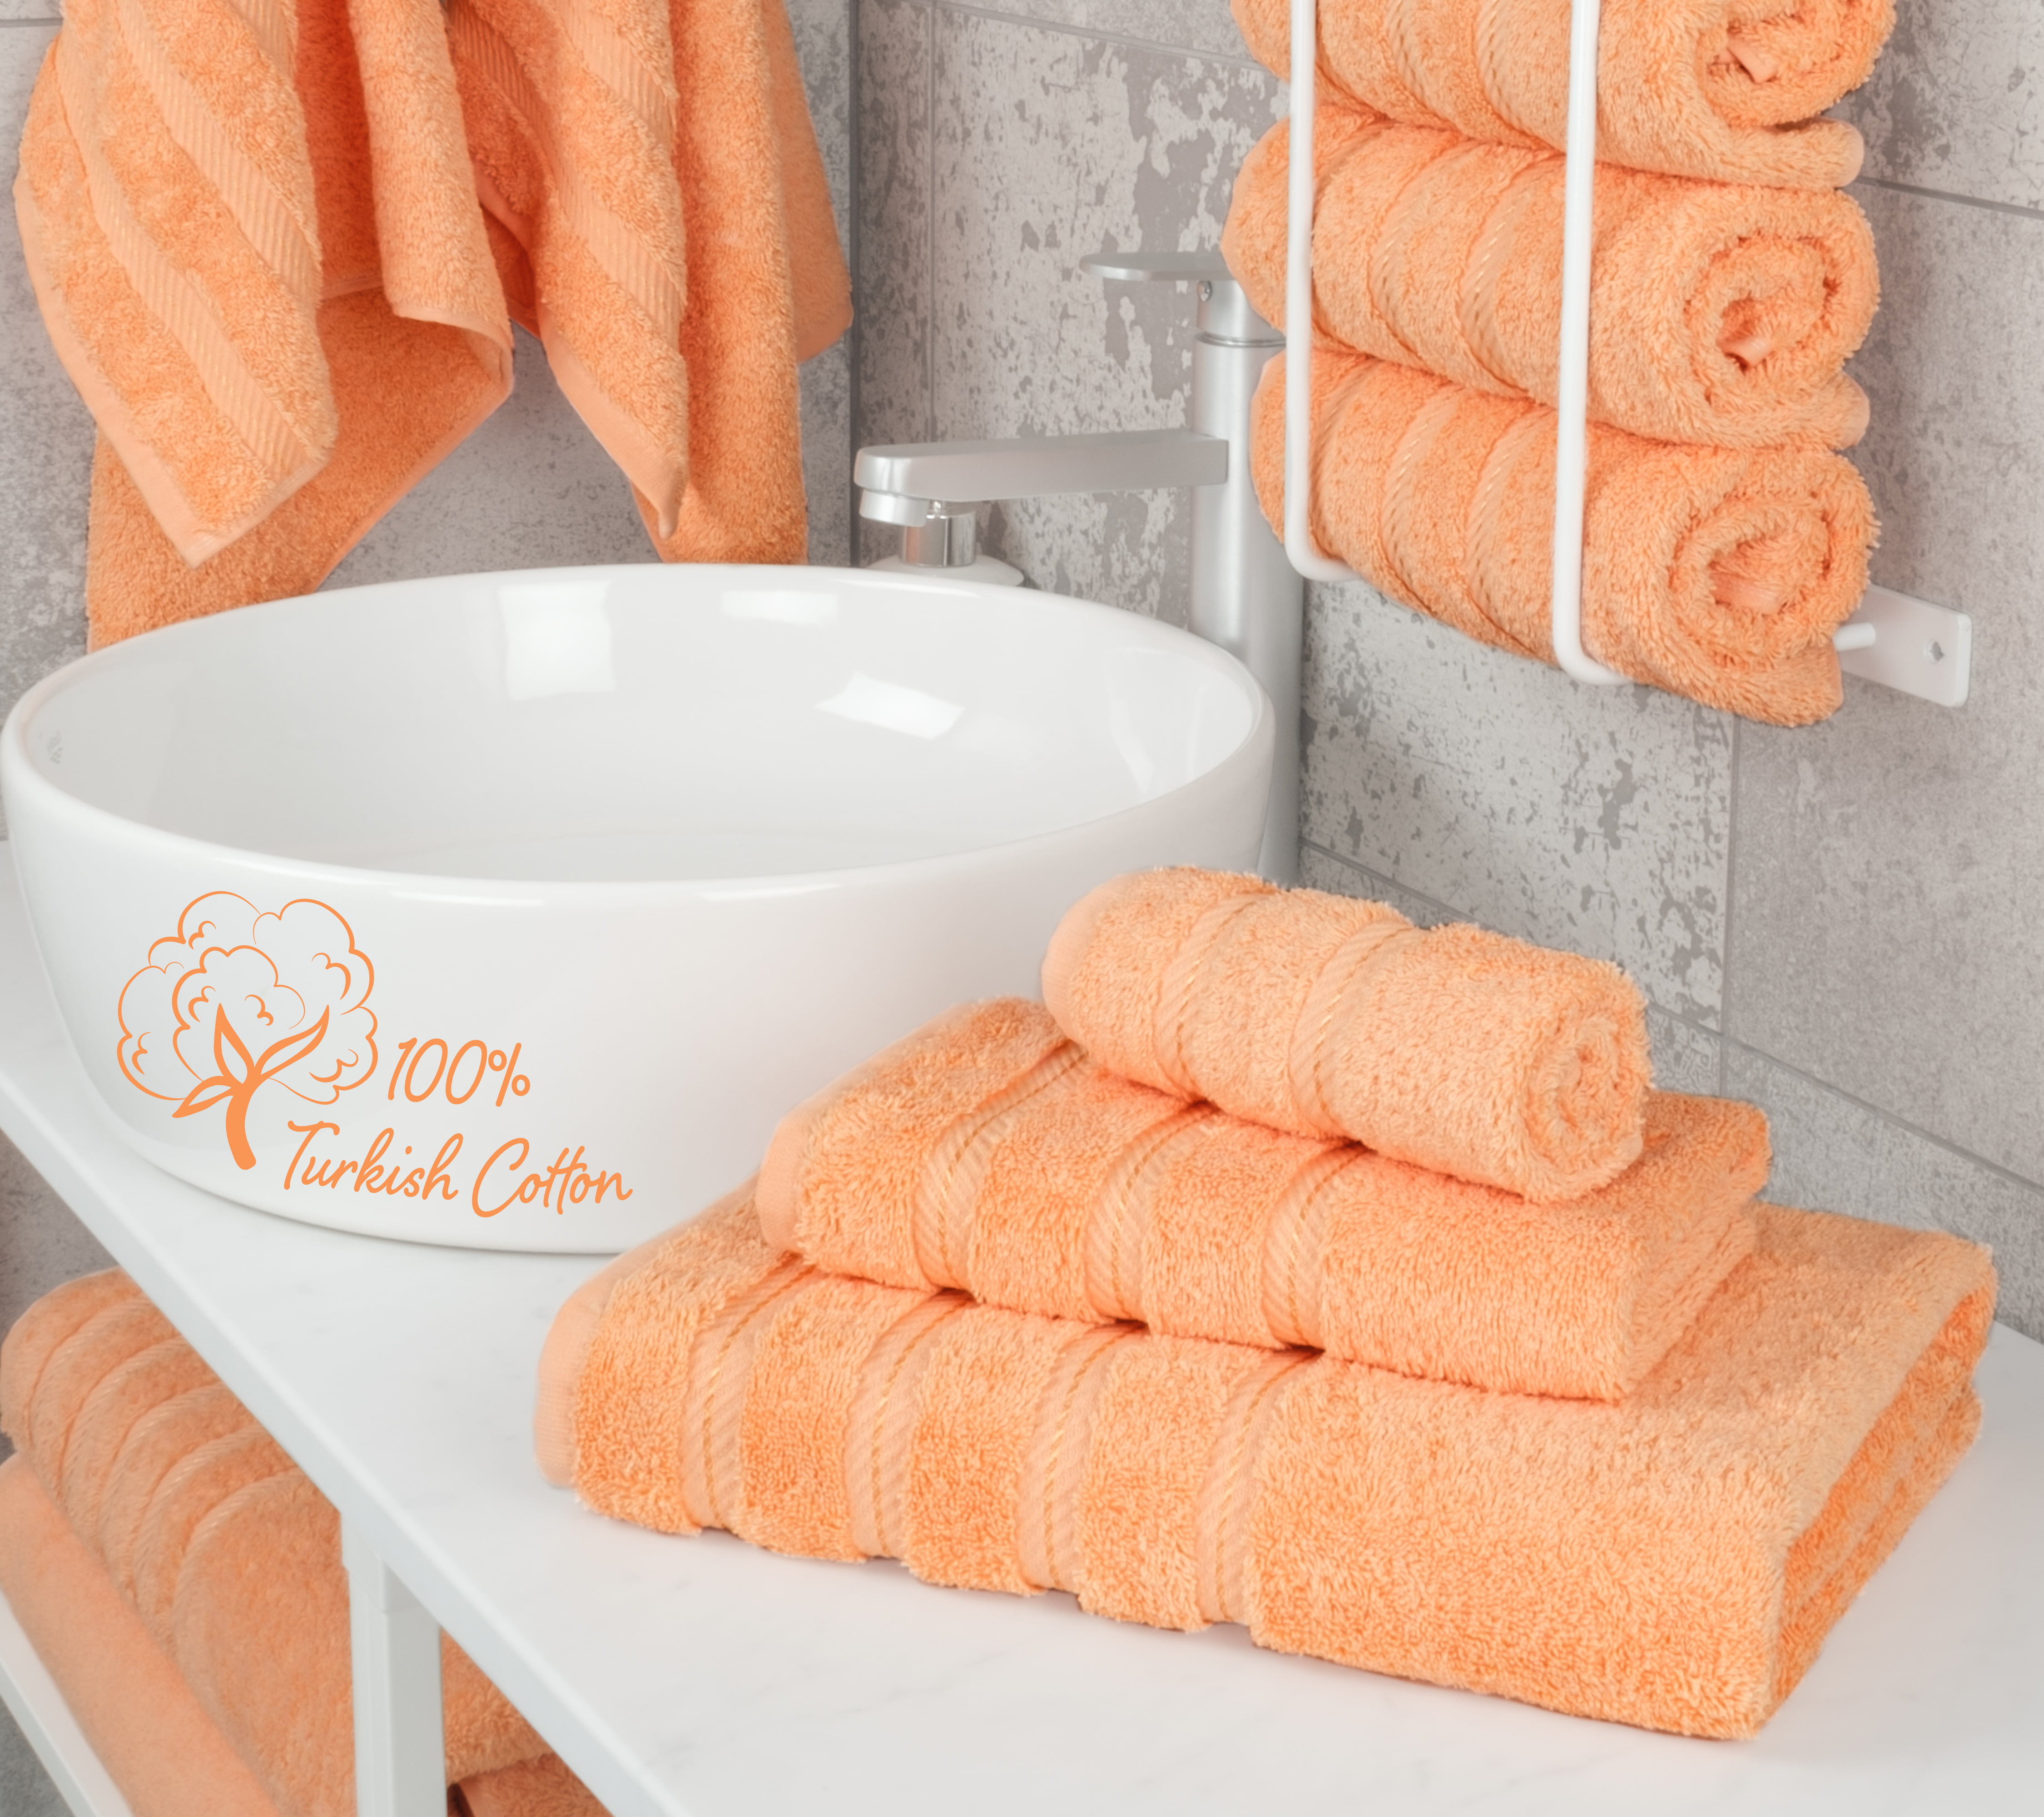 MAURA Basics Performance Bath Towels Set with Hanging Loop. American  Standard Towel size. Soft, Durable, Long Lasting and Absorbent 100% Turkish  Cotton Bath Towels Set for Bathroom 